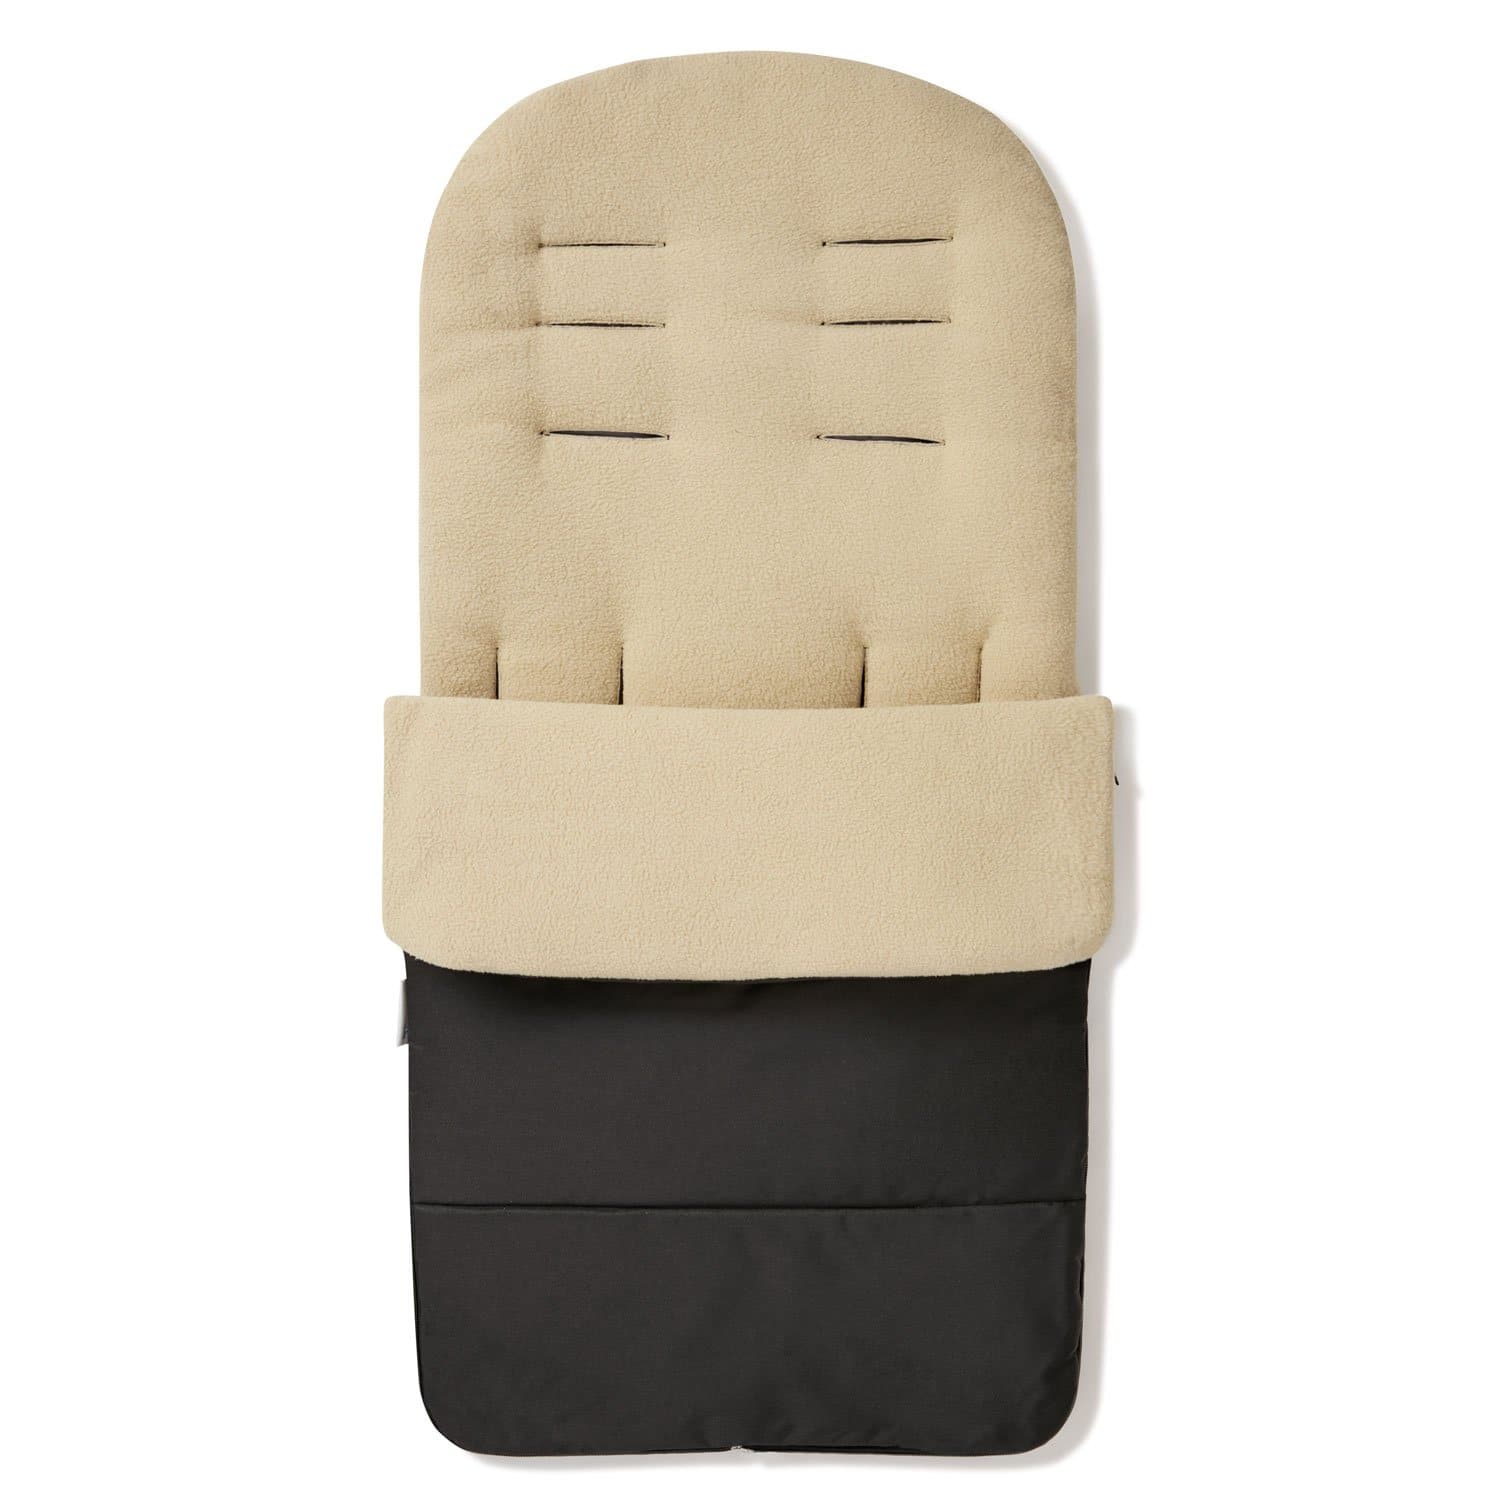 Premium Footmuff / Cosy Toes Compatible with Gesslein - Desert Sand / Fits All Models | For Your Little One